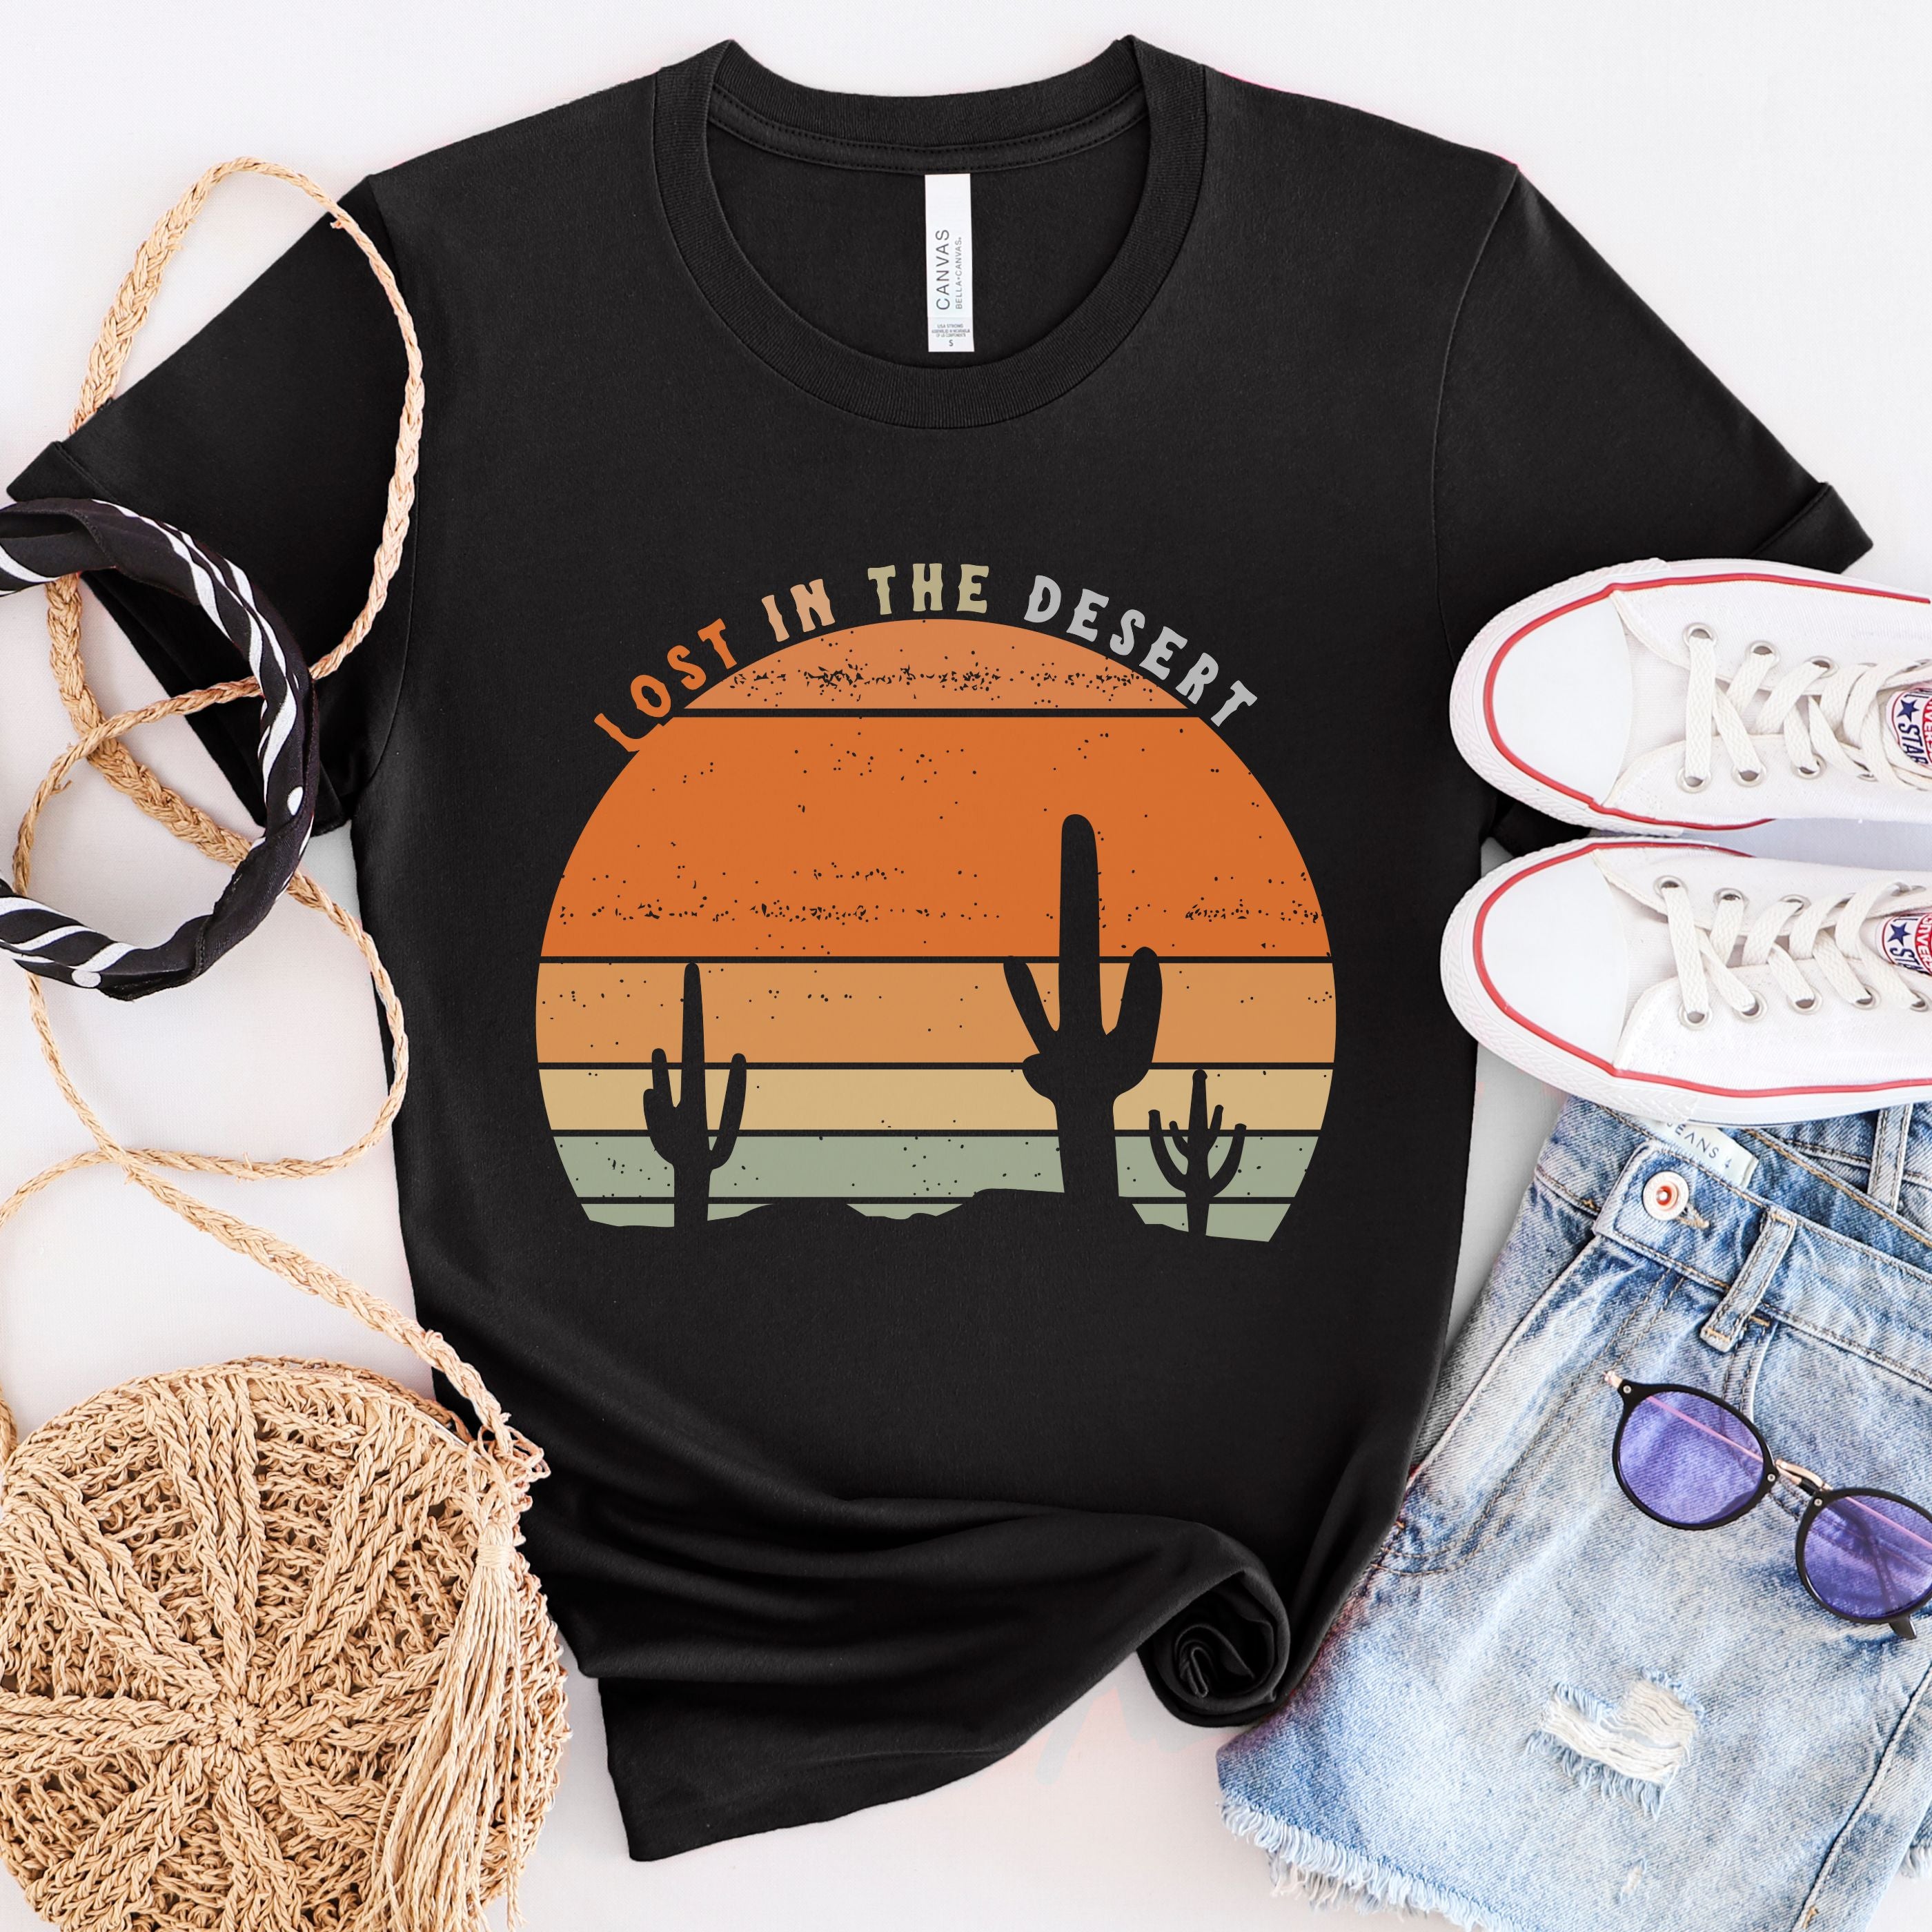 Lost In the Desert Tee